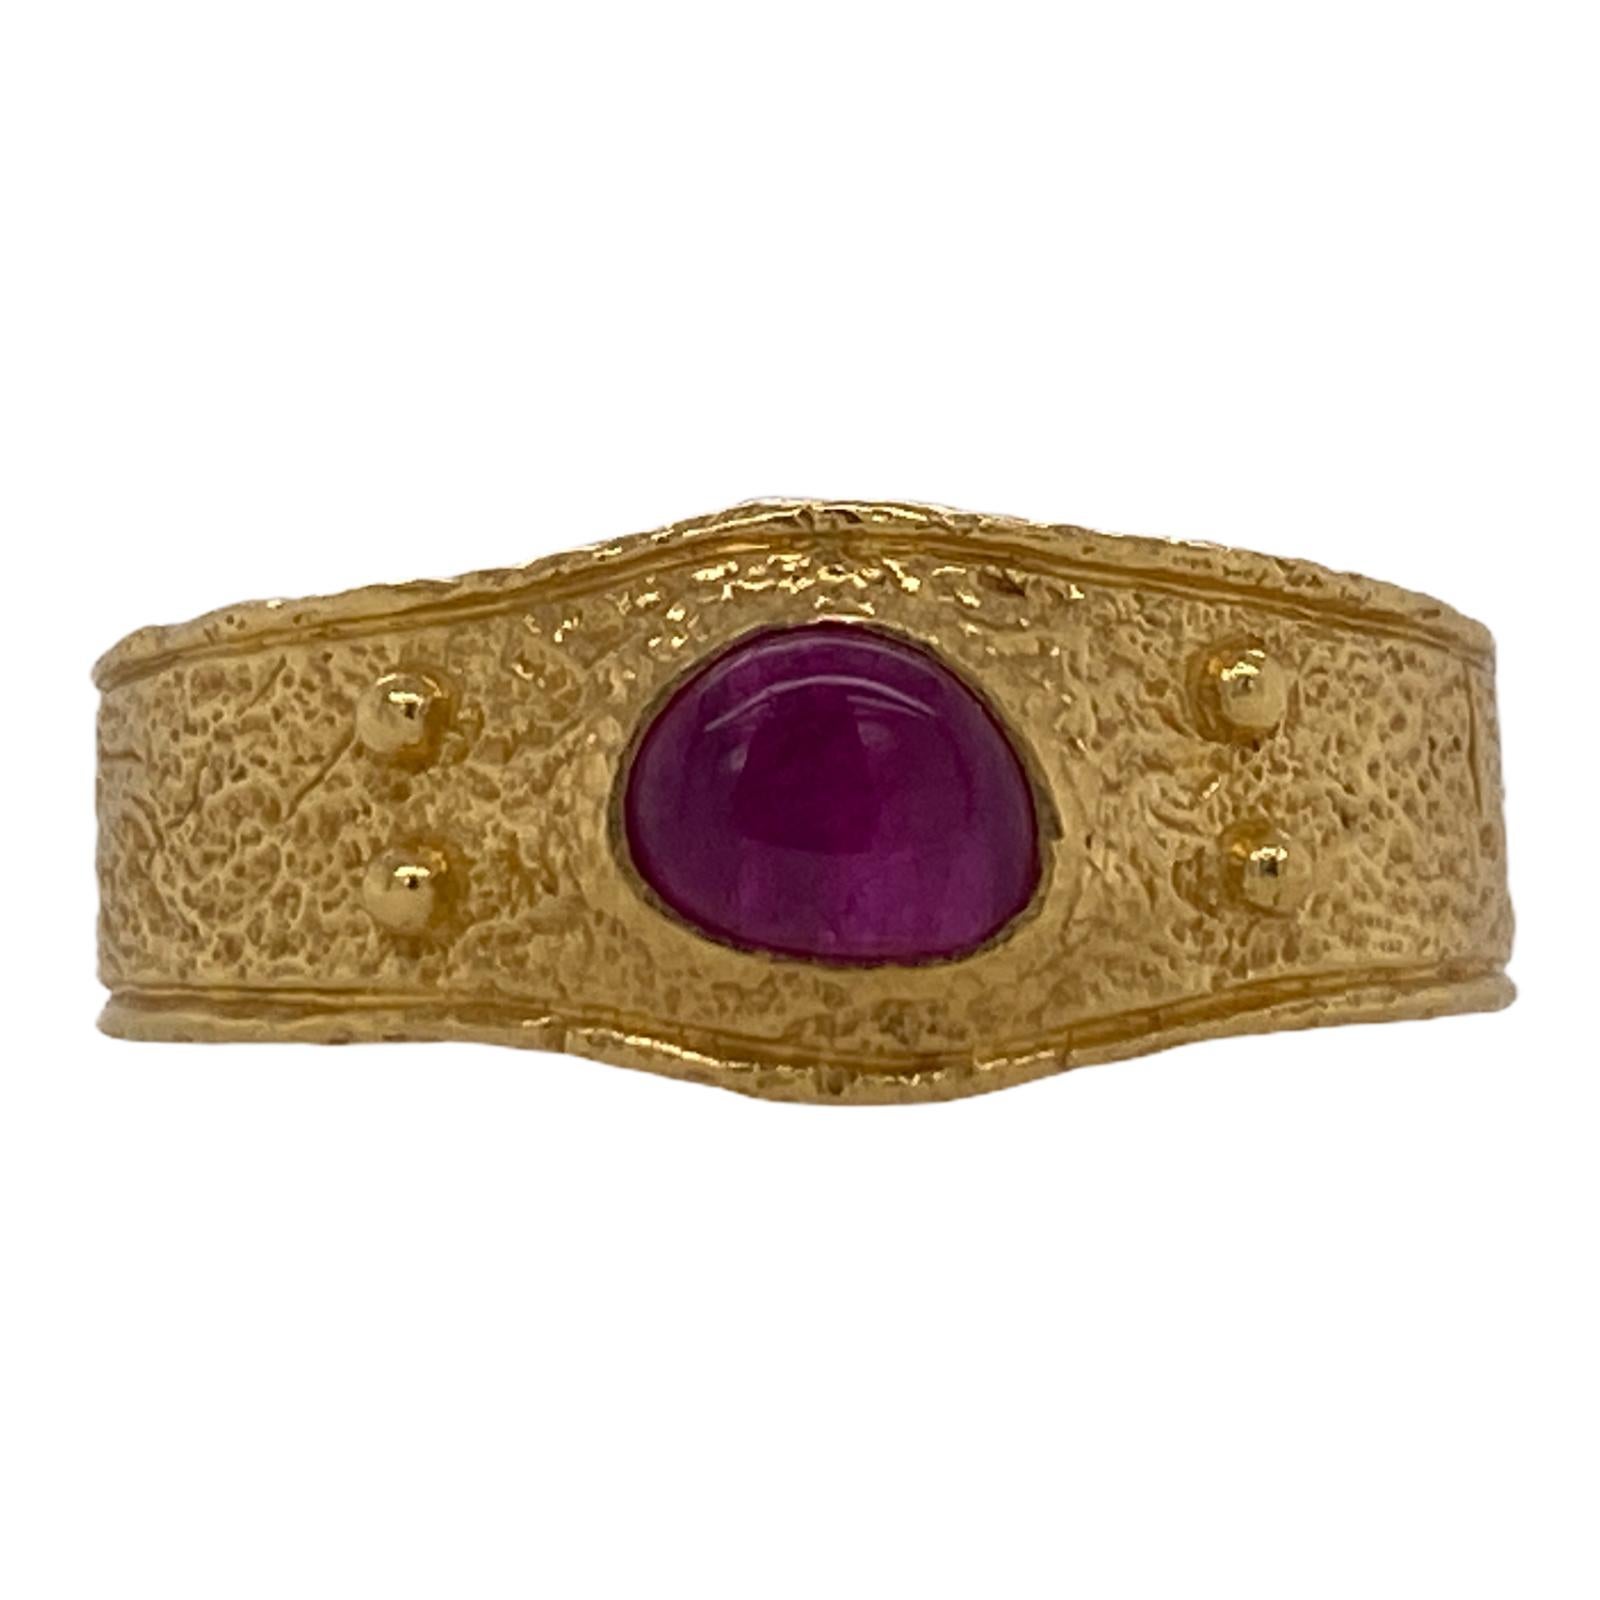 David Yurman 22 karat yellow gold textured band ring from the Shipwreck current collection. The band features a cabochon ruby gemstone. The ring is currently size 10.5 (can be sized), and weighs: 12.3 grams. Signed DY 916. David Yurman jewelry pouch